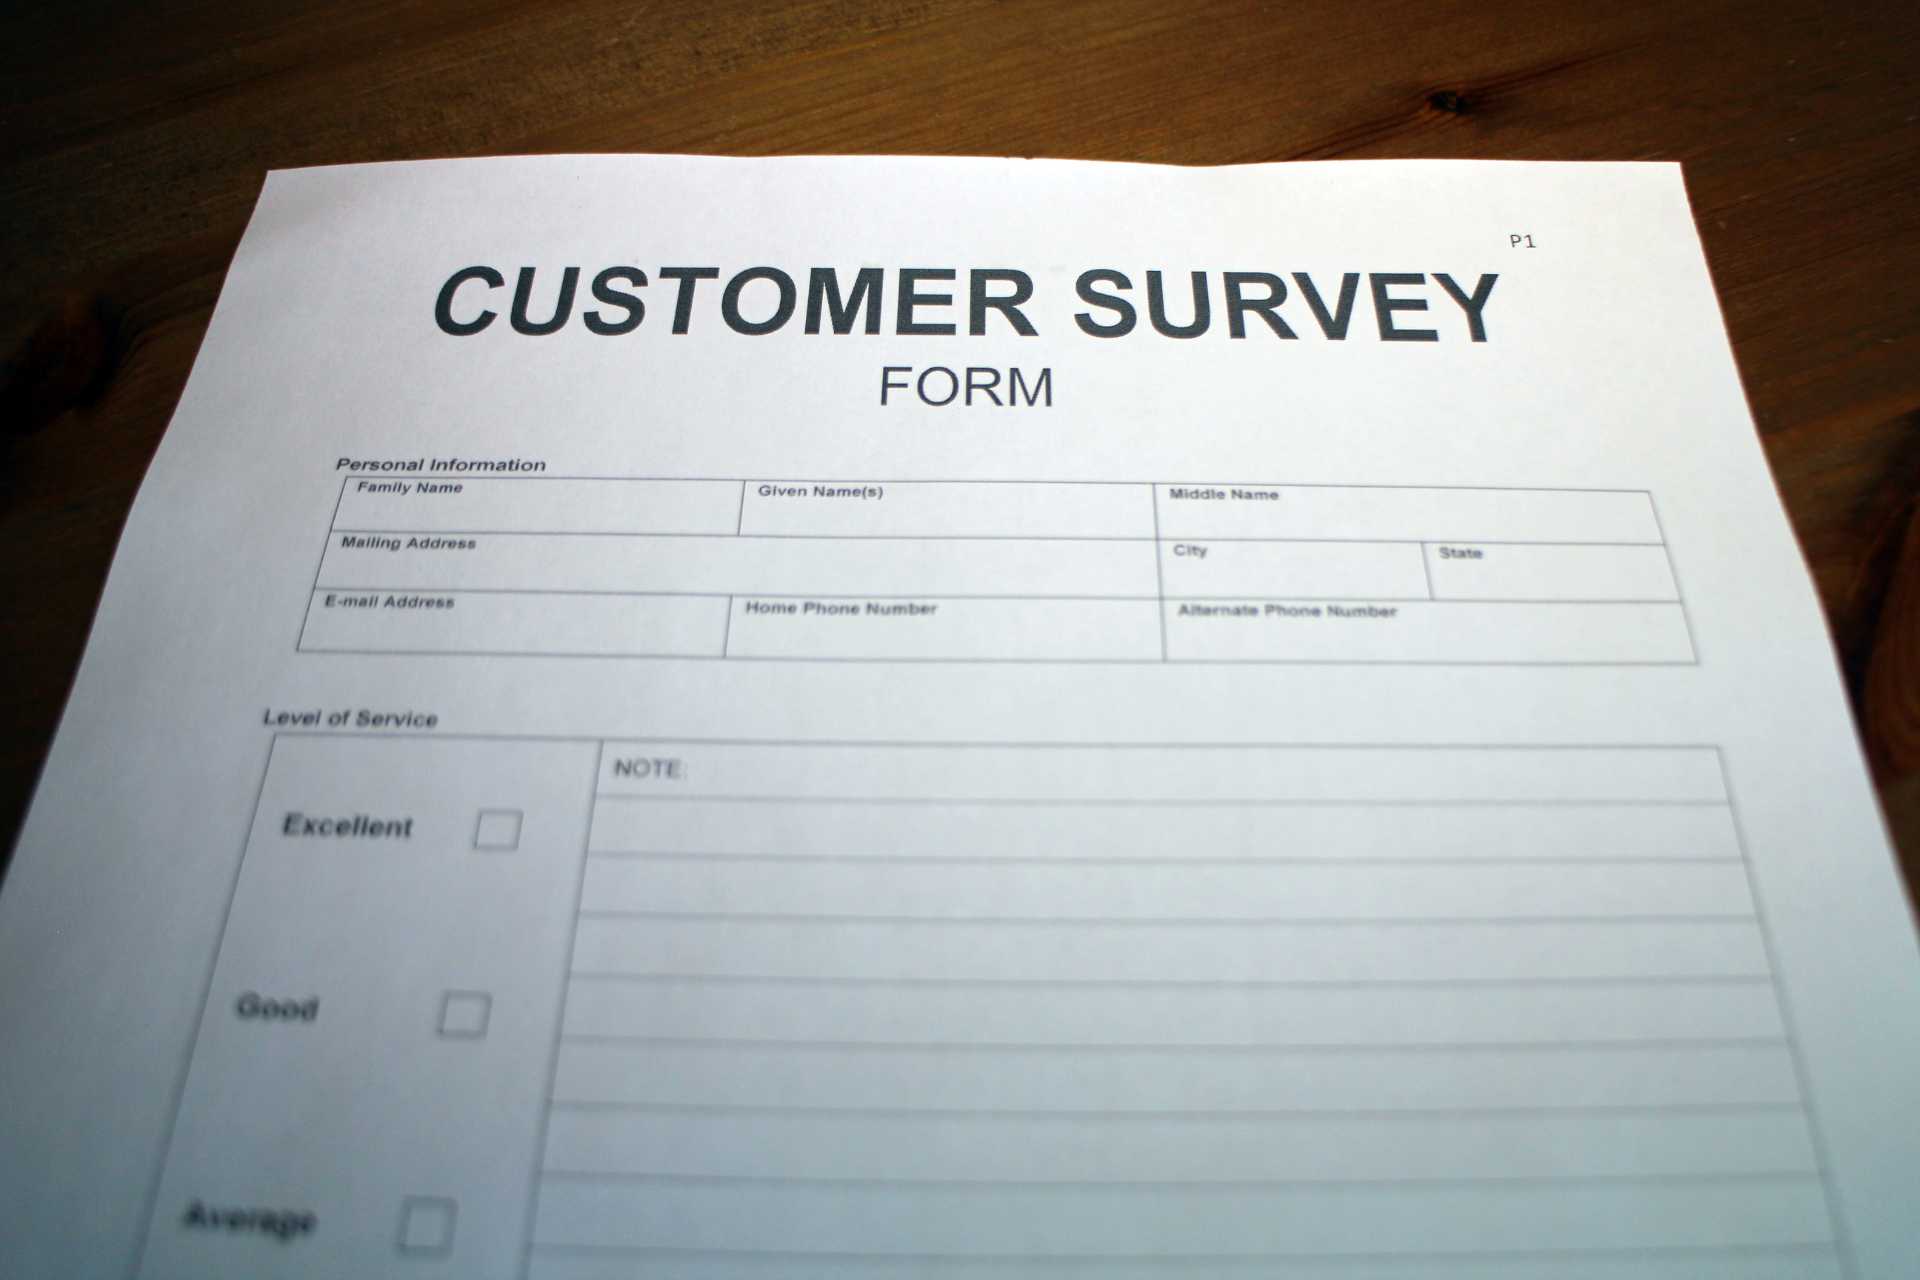 Printed customer survey form on a wooden surface with sections for personal information such as family name, given names, and contact details, followed by a service level rating ranging from 'Excellent' to 'Poor' and a section for additional notes